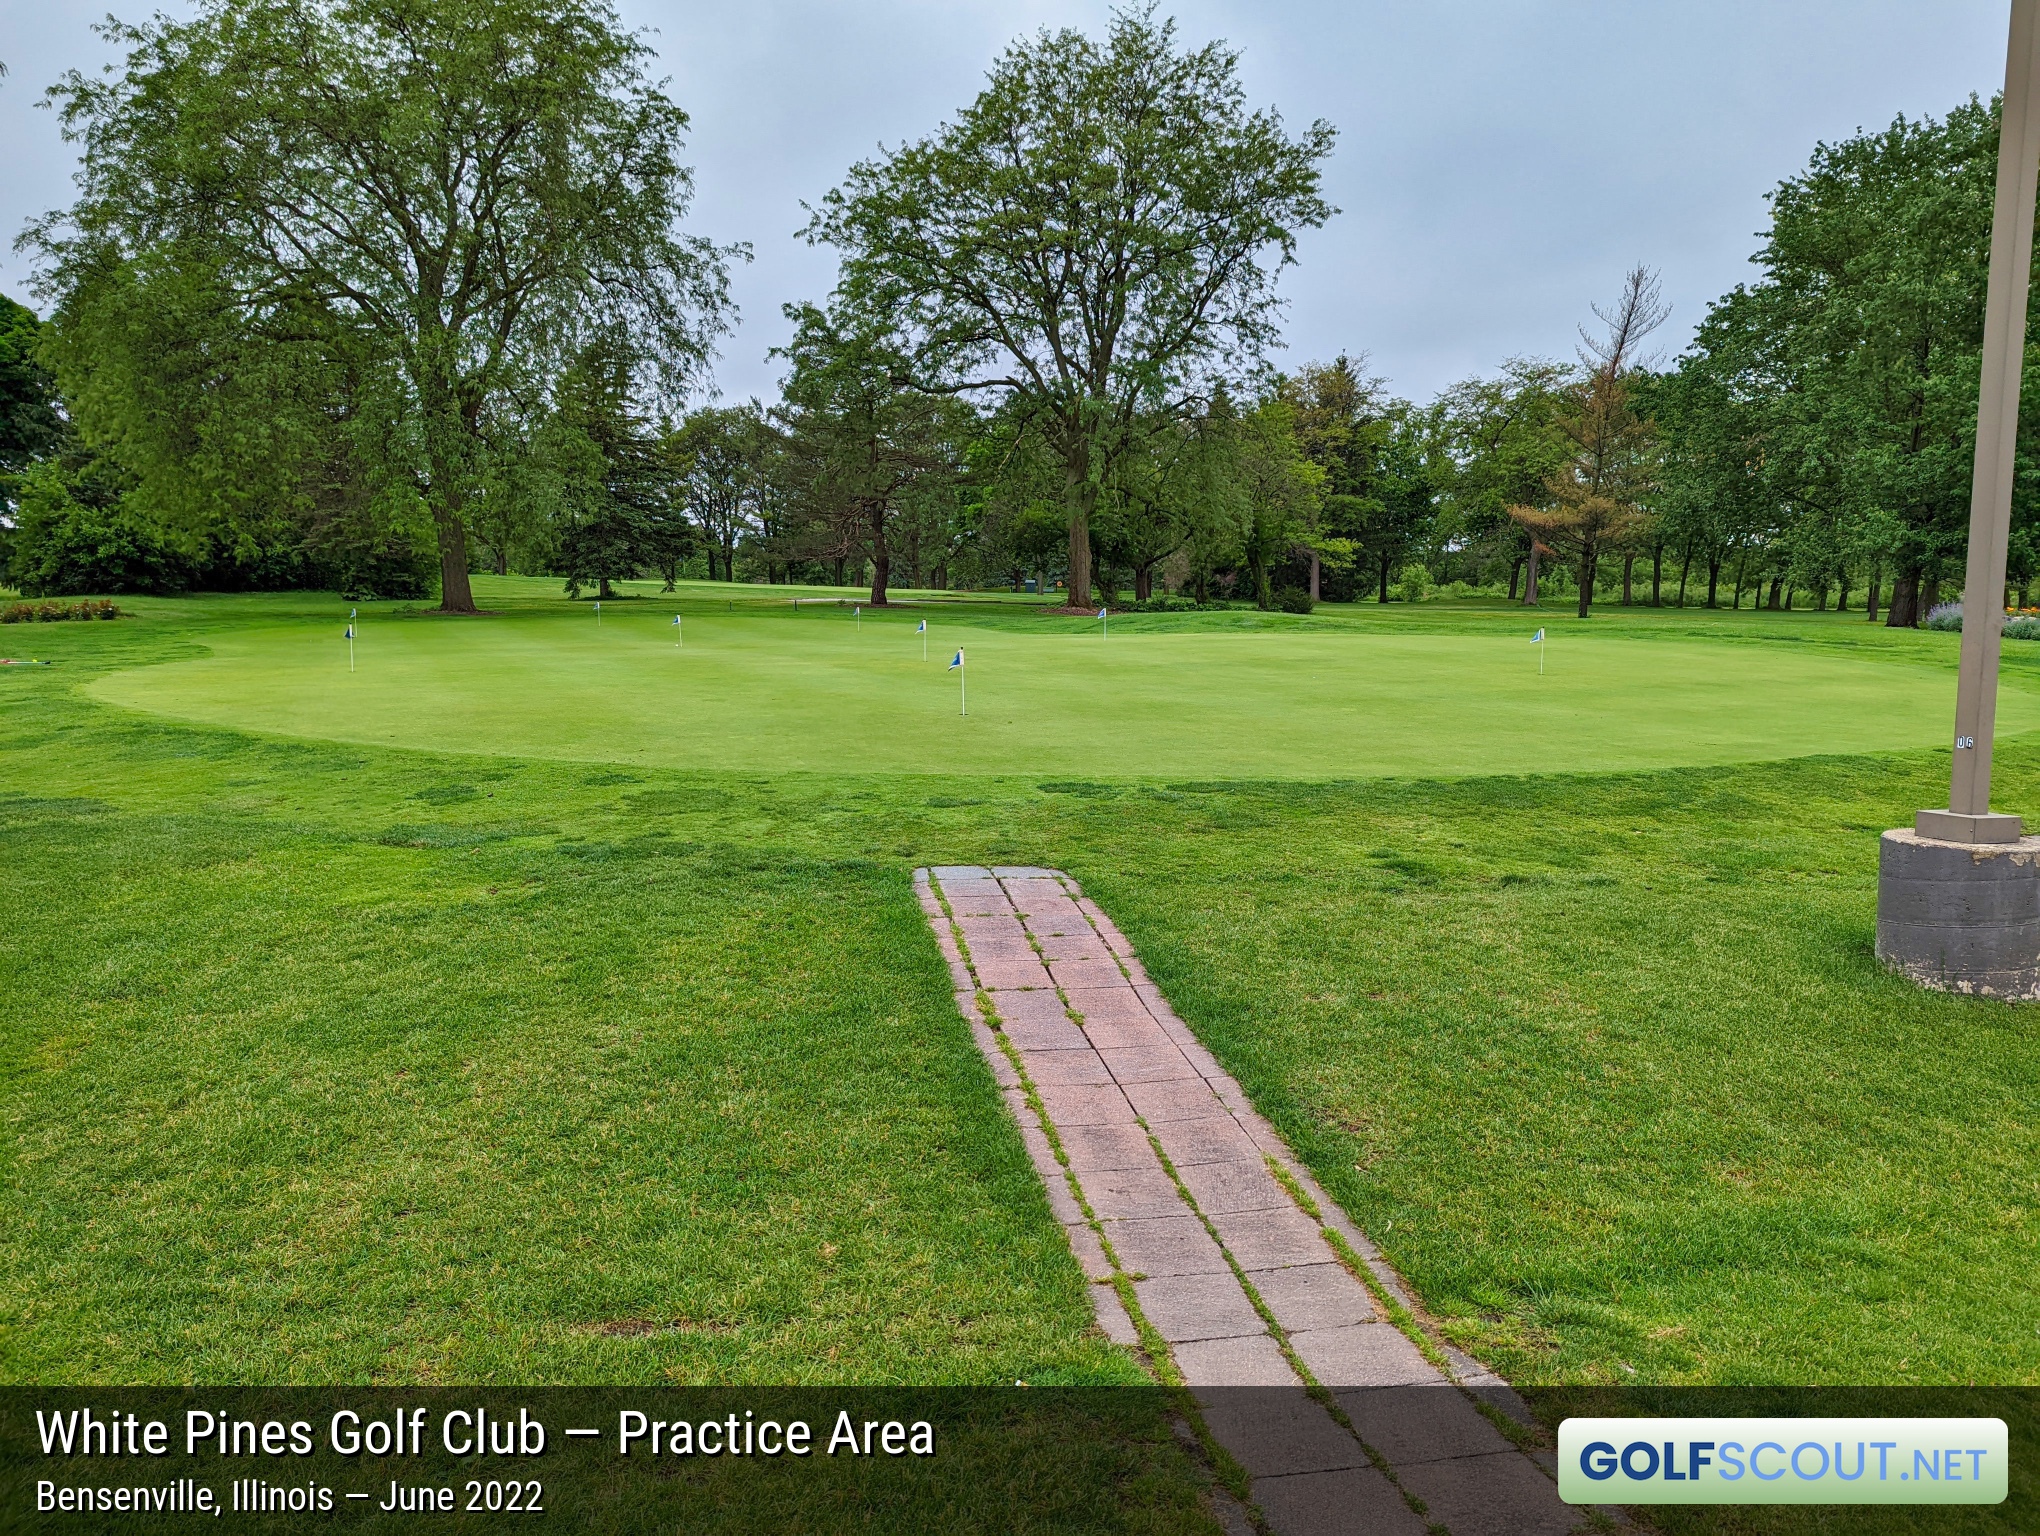 Photo of the practice area at White Pines East Course in Bensenville, Illinois. 